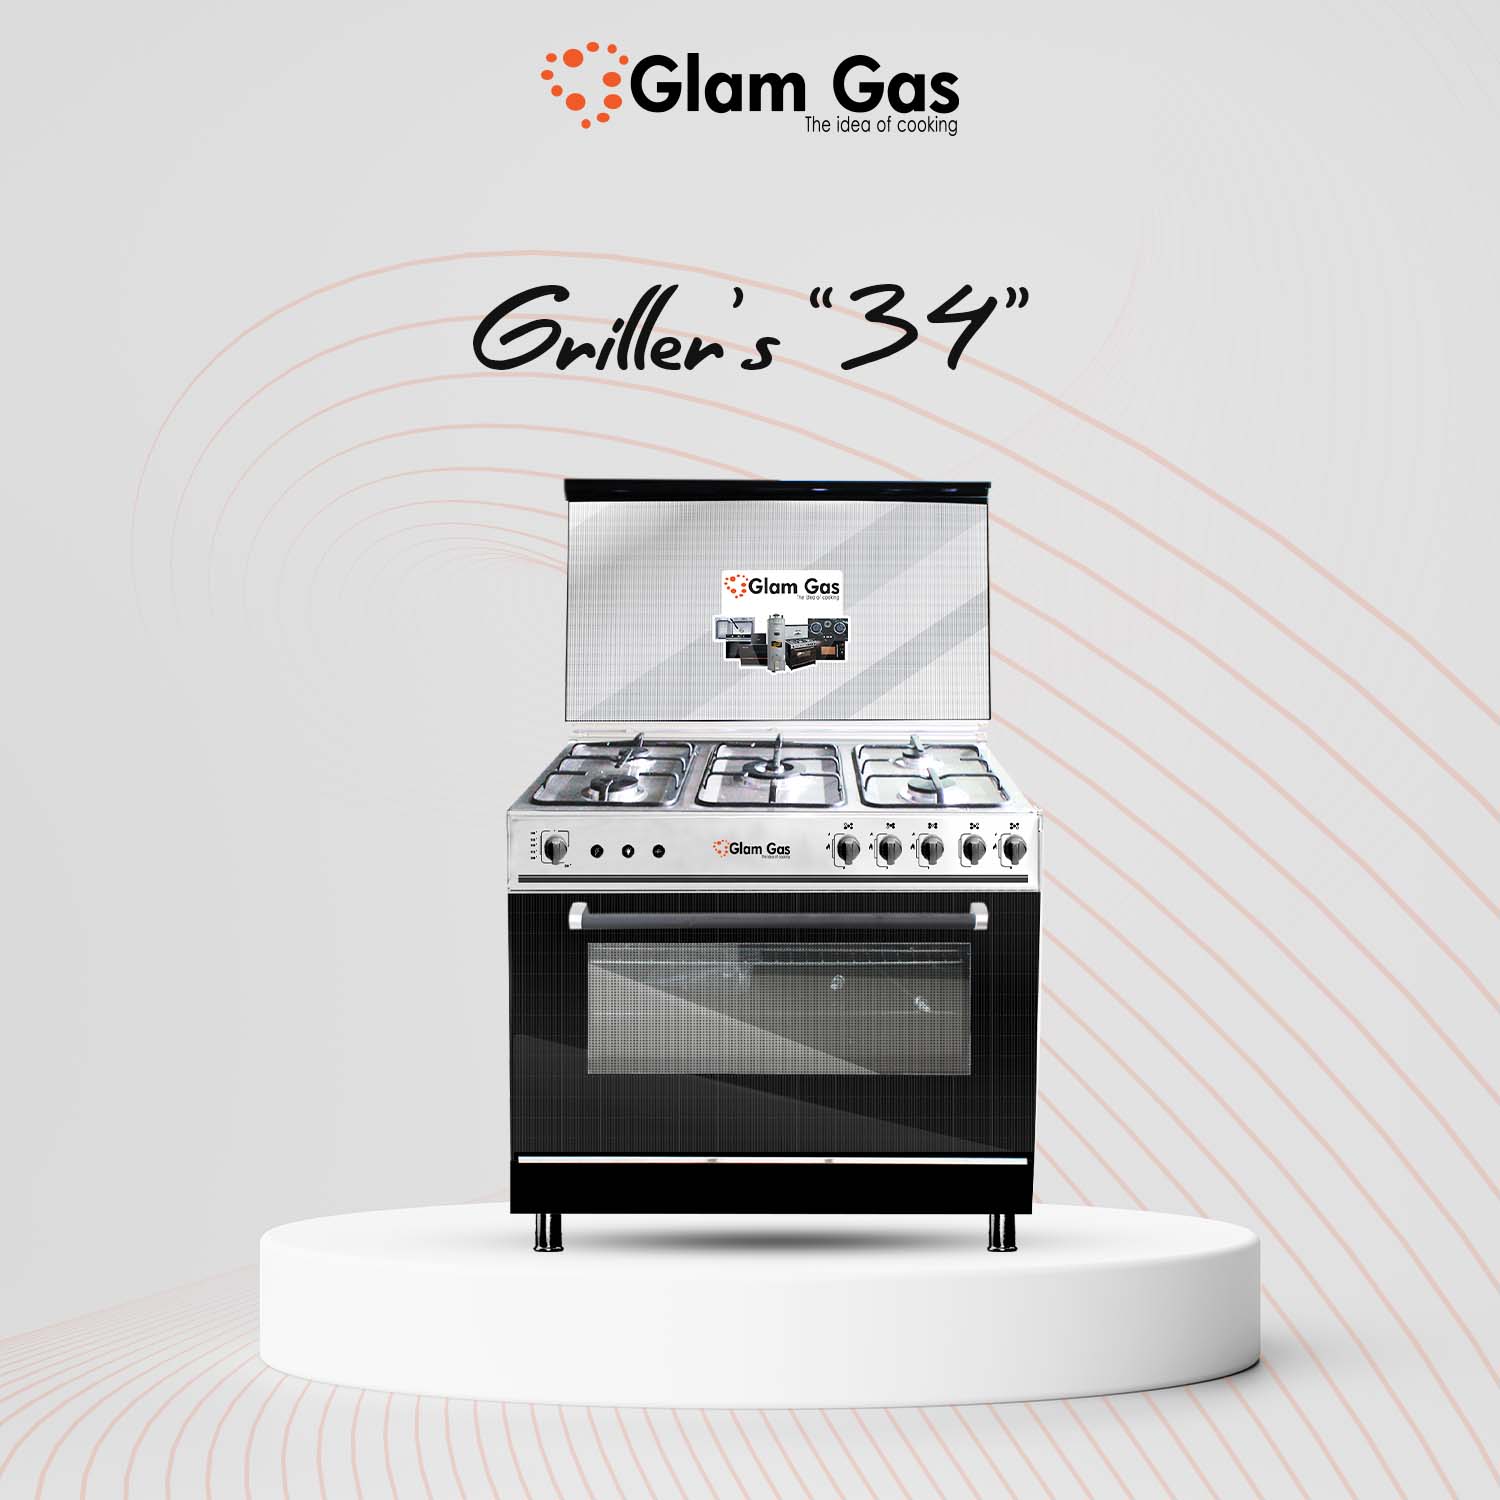 Buy Cooking Range Grillers 34 | Cooking Range With Oven Price in pakistan